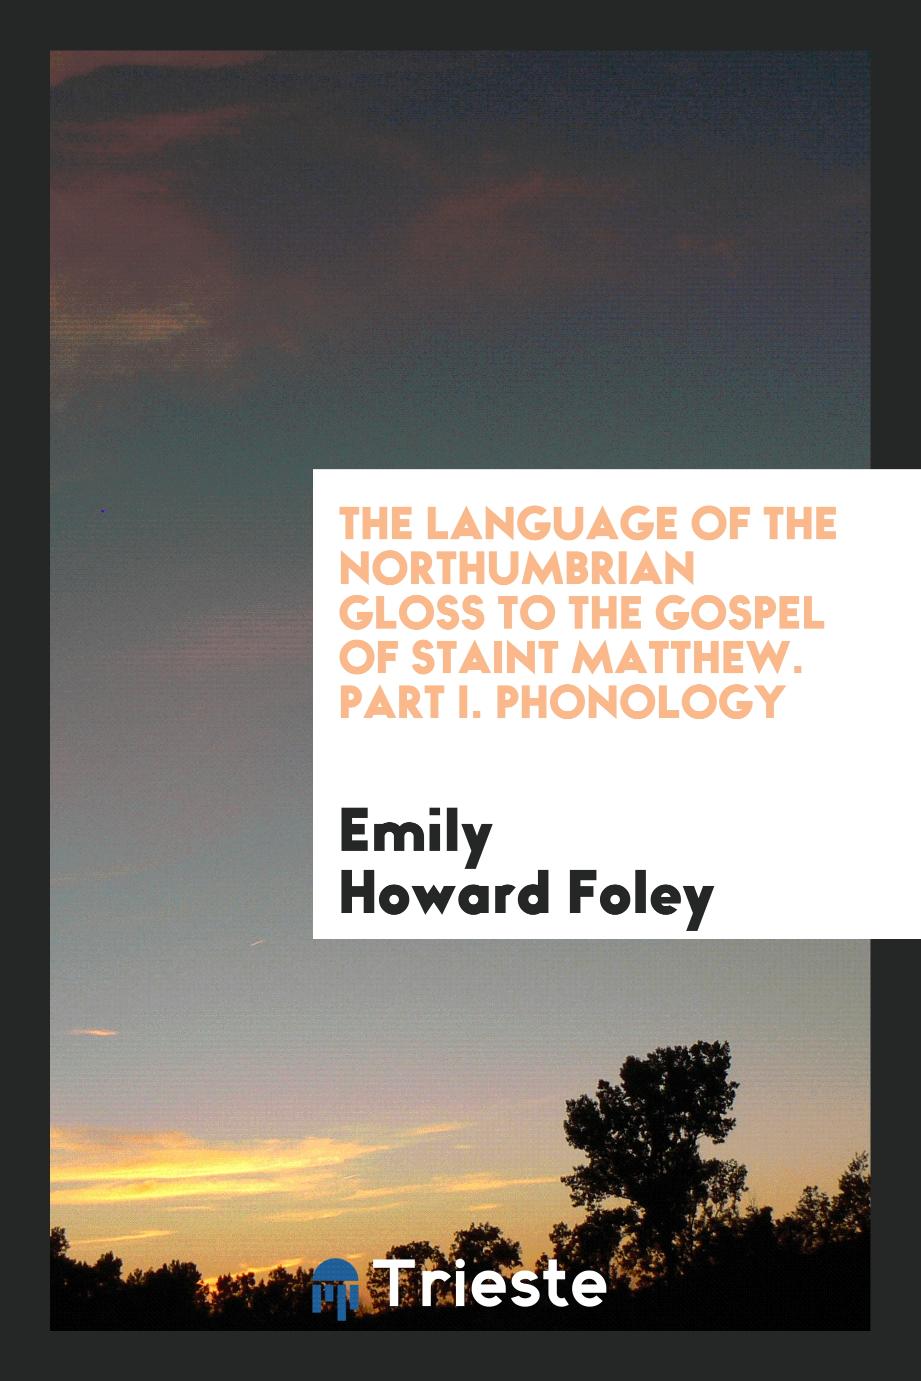 The Language of the Northumbrian Gloss to the Gospel of Staint Matthew. Part I. Phonology